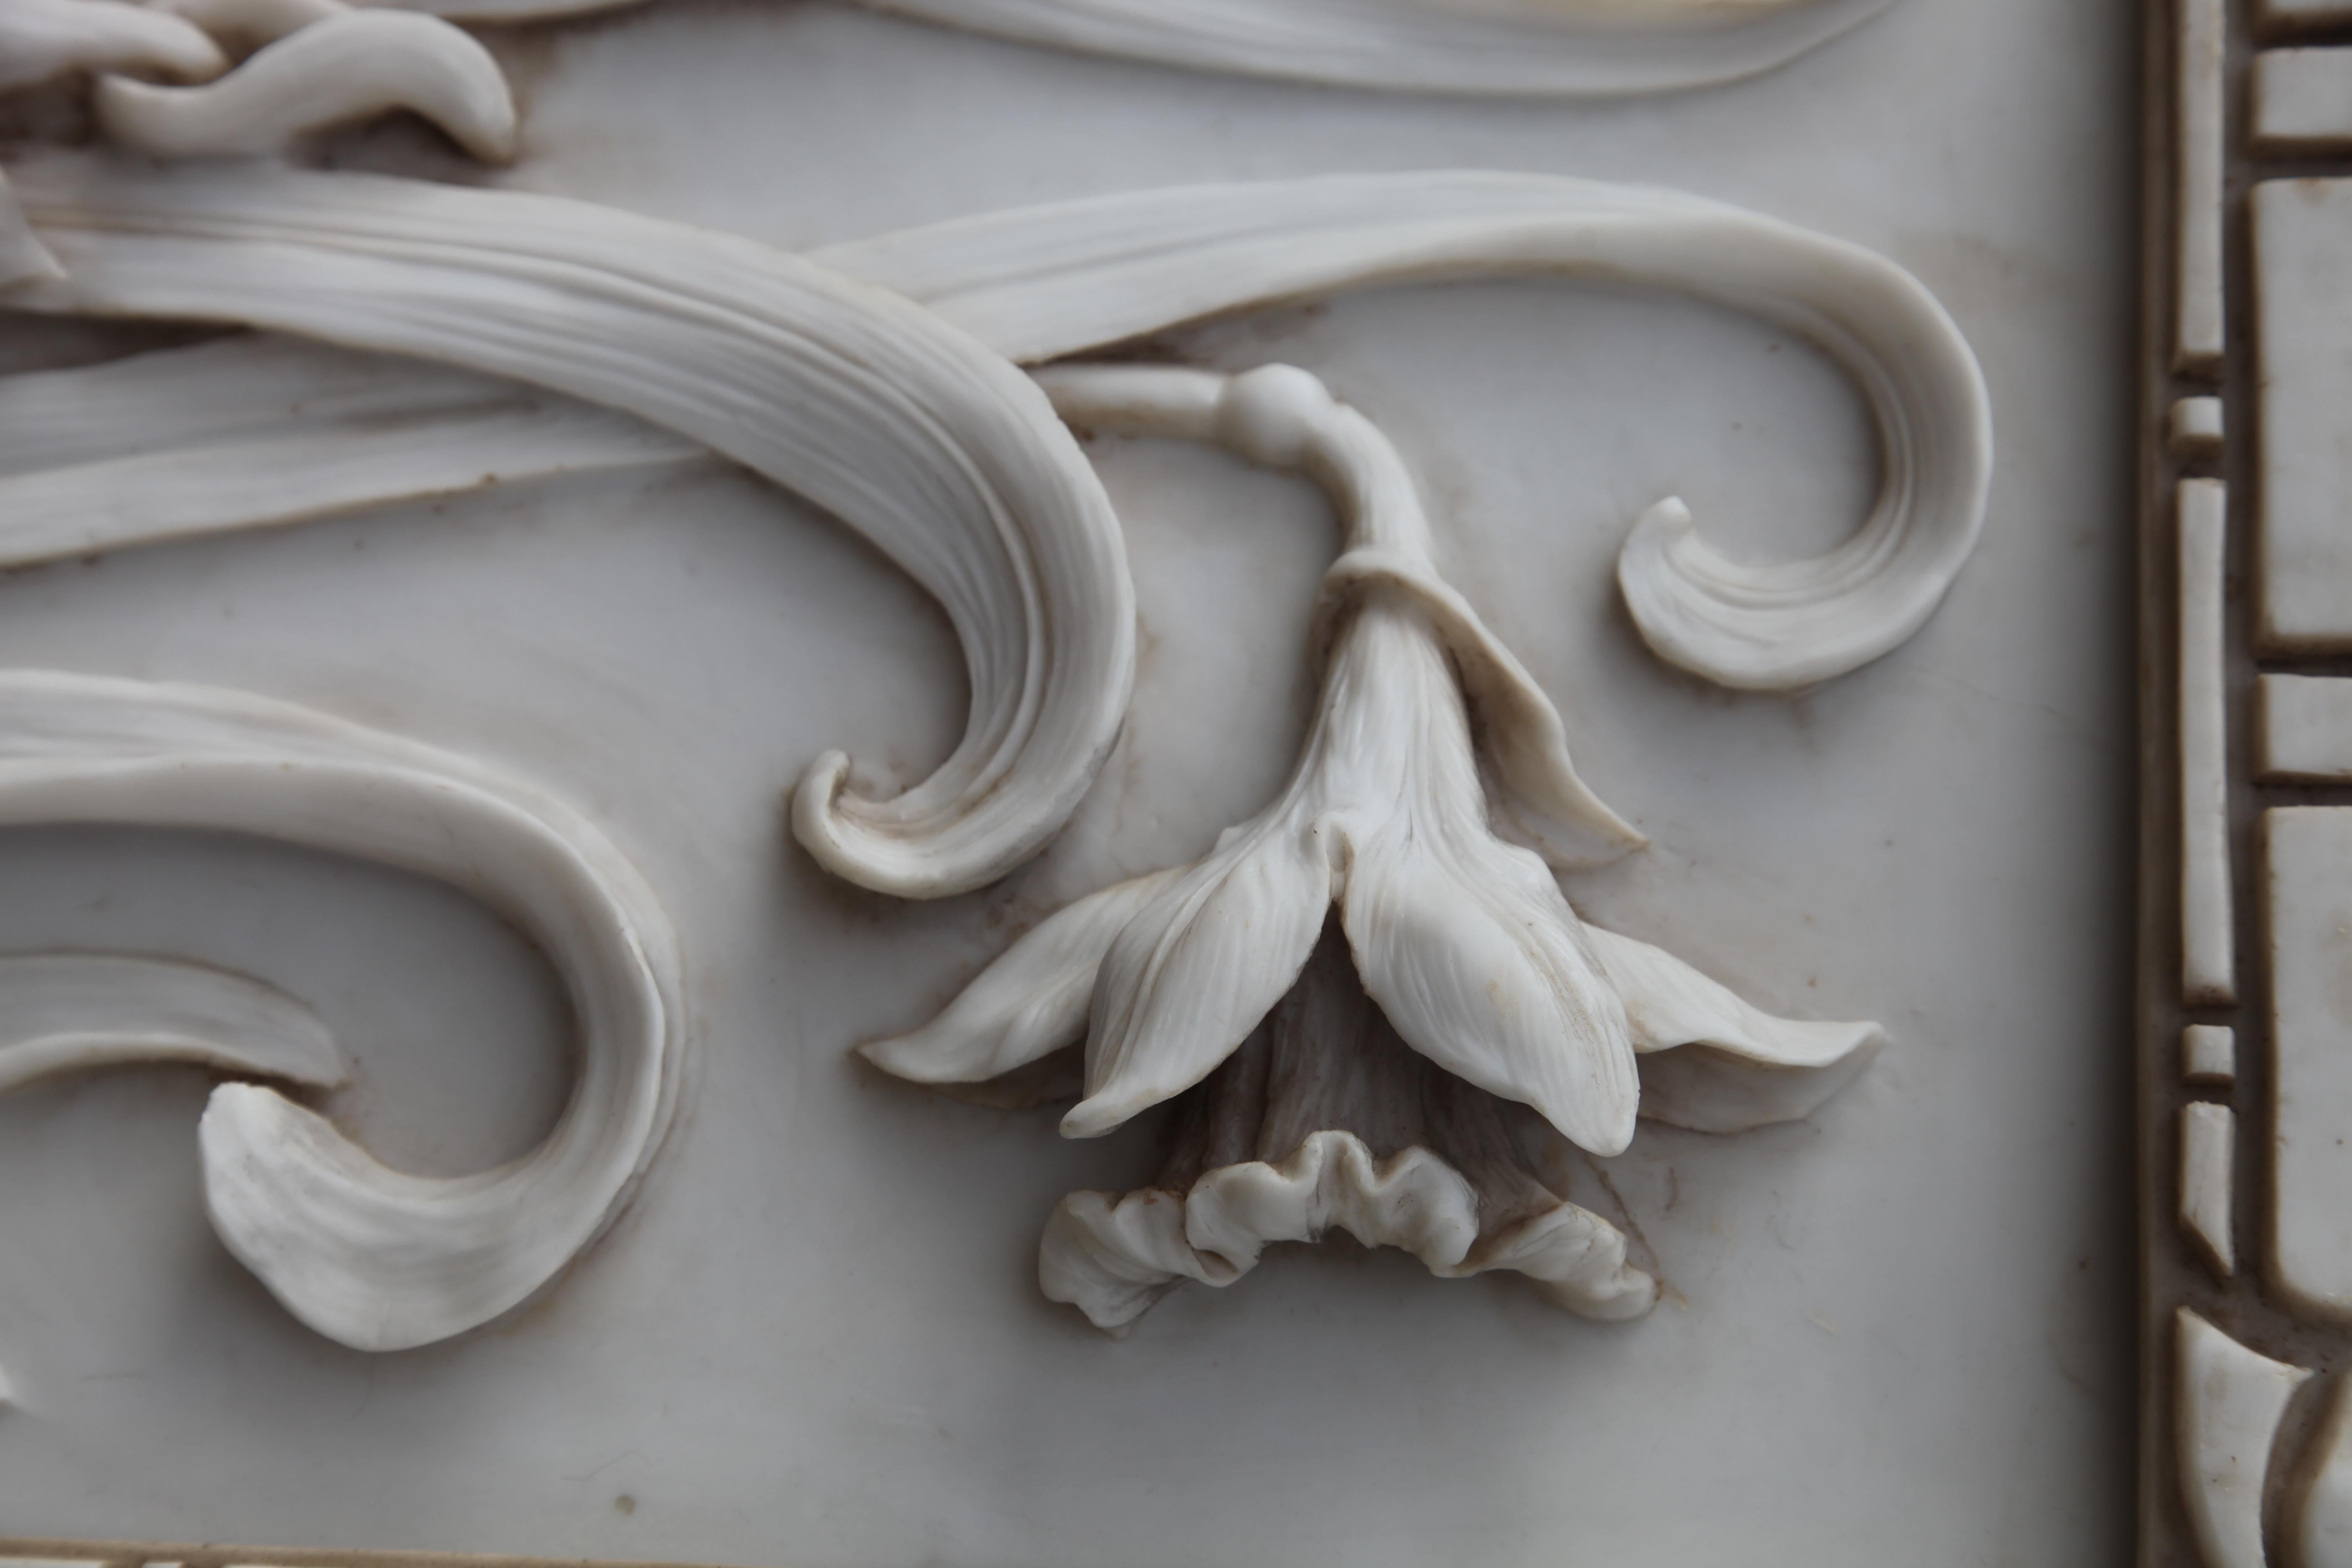 Hand-Carved Art Nouveau 3-D Alabaster Sculptural Panel with Foliage and Daffodils / Jonquils For Sale